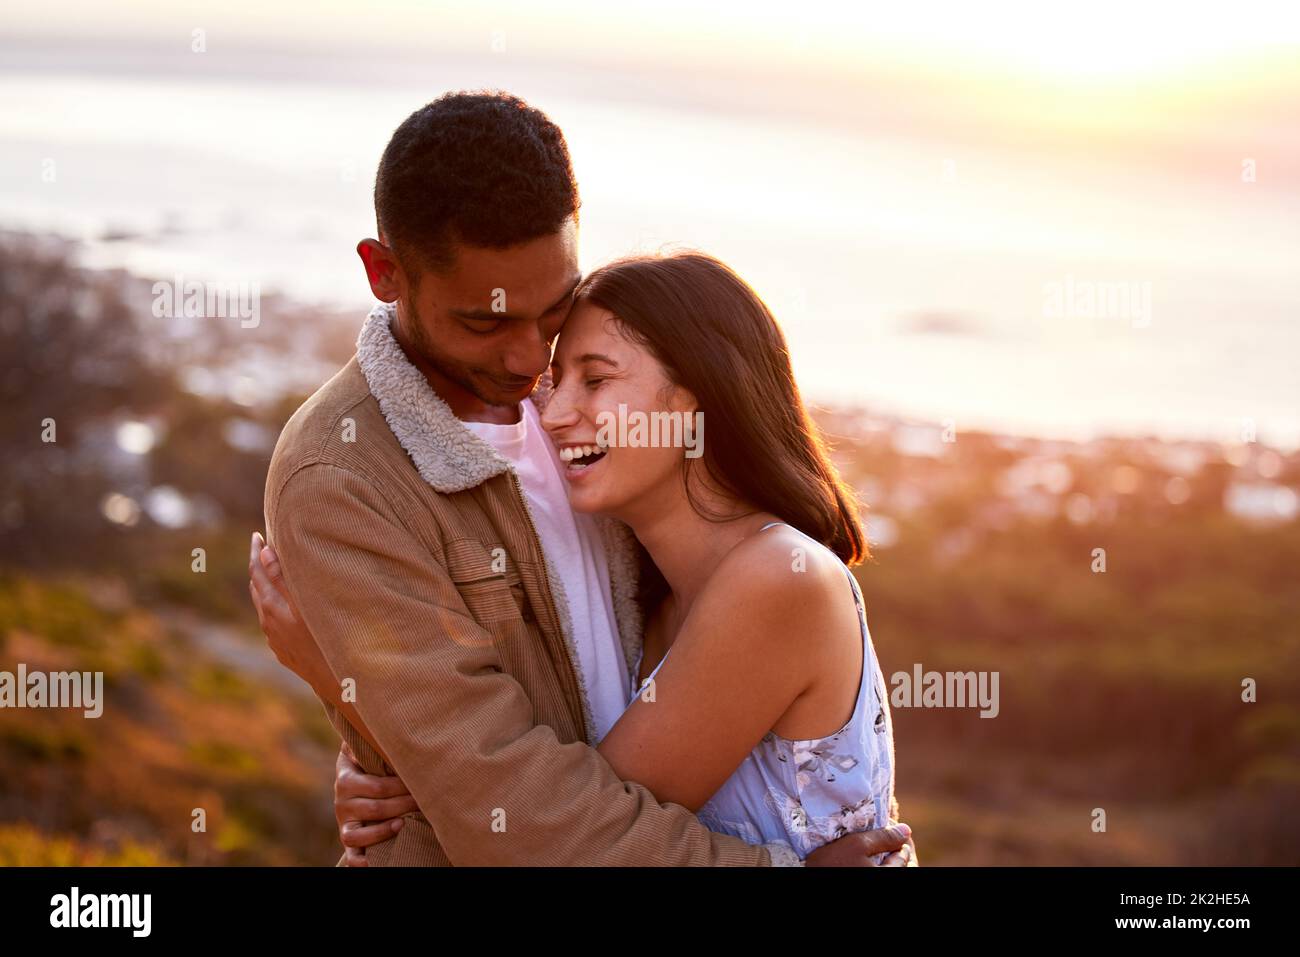 Nowhere else Id rather be. Cropped shot of an affectionate young couple embracing lovingly at sunset. Stock Photo